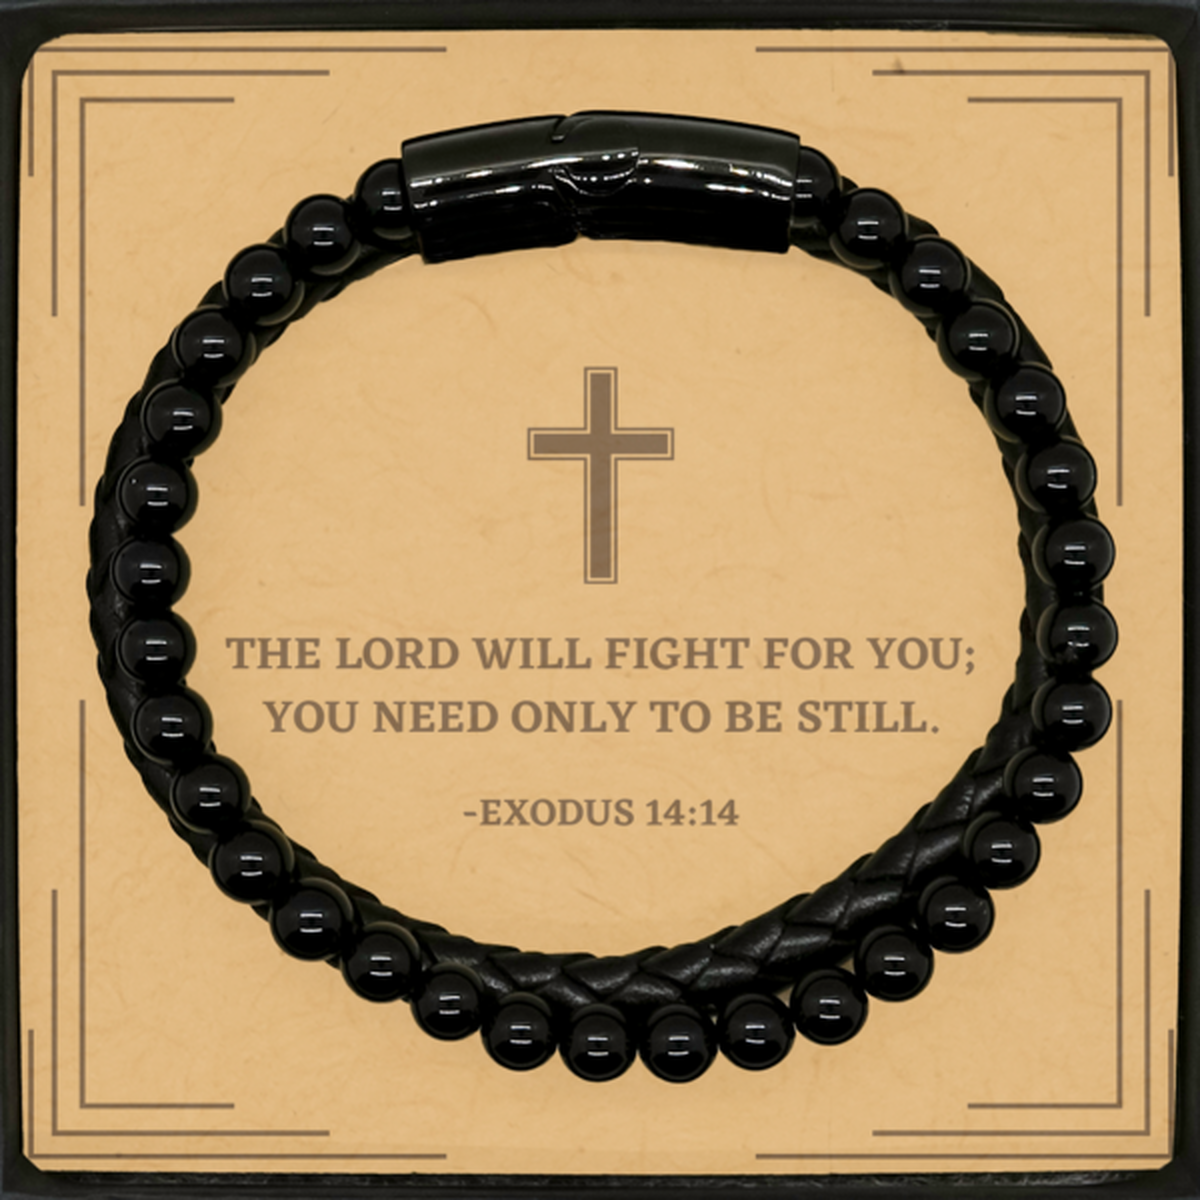 Baptism Gifts For Teenage Boys Girls, Christian Bible Verse Stone Leather Bracelet, The Lord will fight for you, Confirmation Gifts, Bible Verse Card for Son, Godson, Grandson